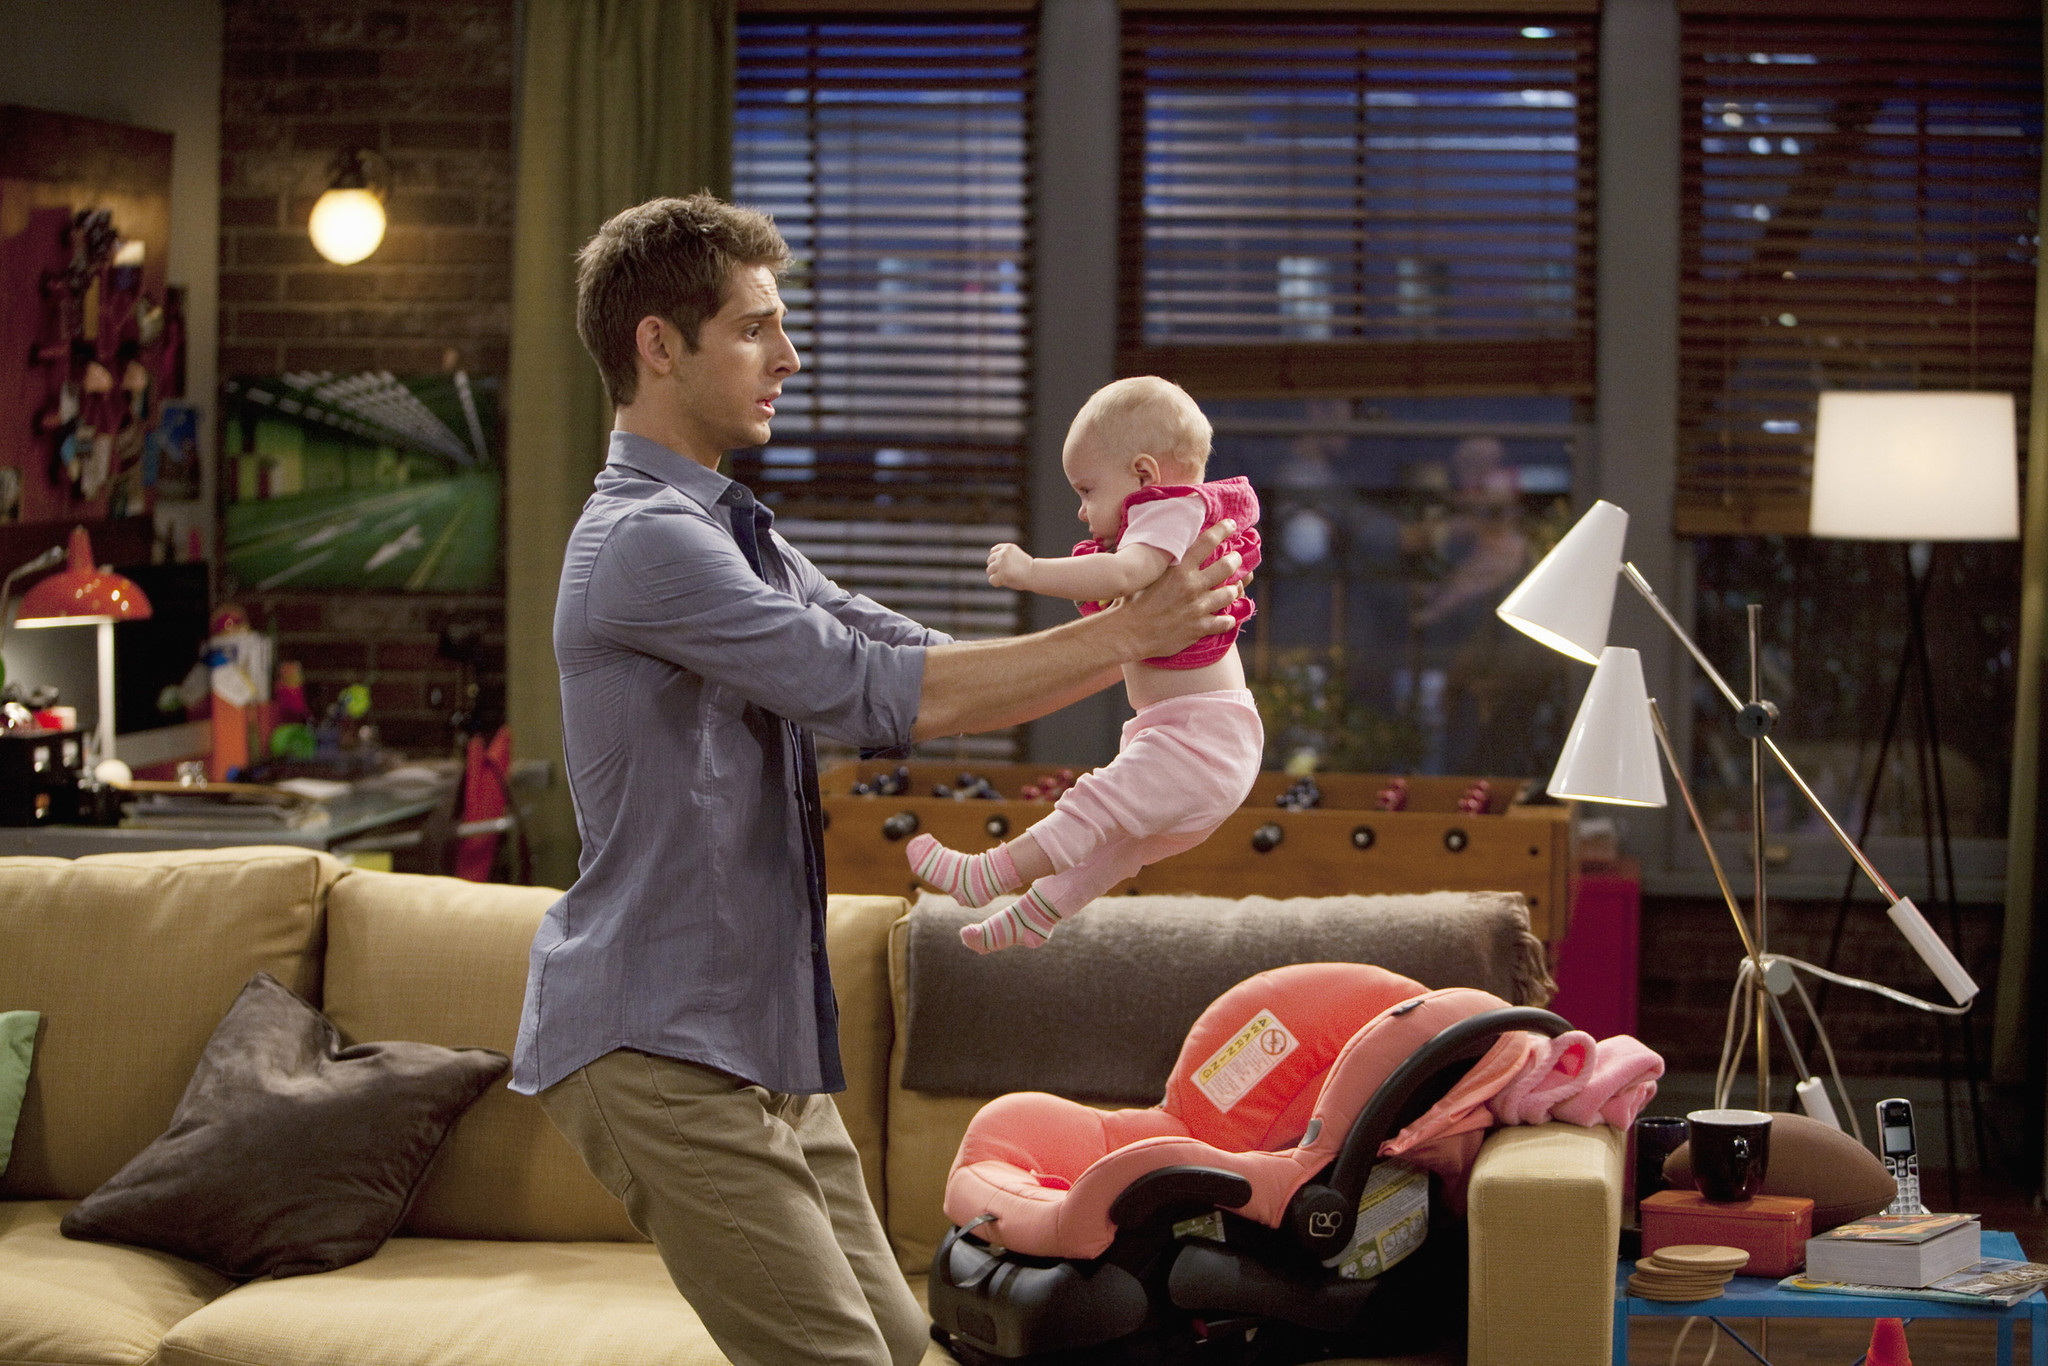 Baby Daddy Wallpapers